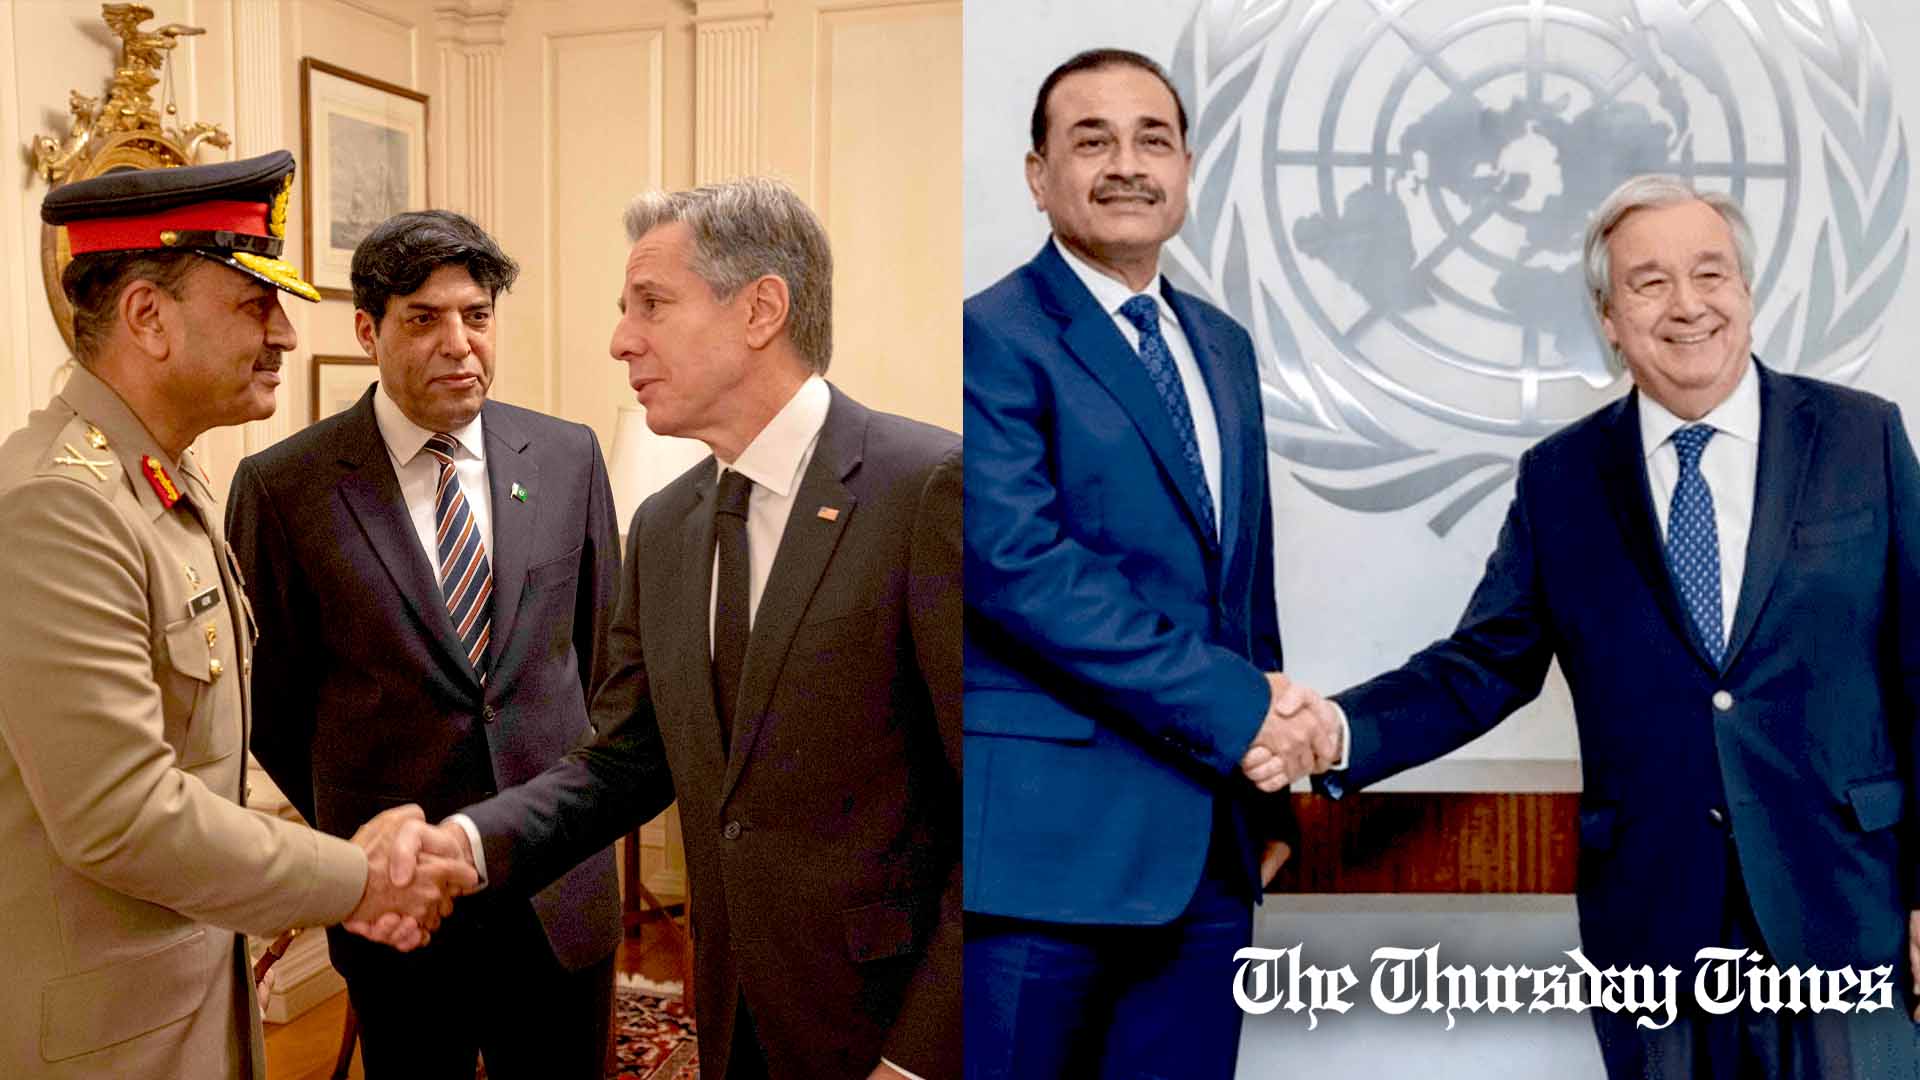 Combined file photos are shown of COAS Gen Asim Munir meeting with U.S. Secretary of State Anthony Blinken (L) and UN Secretary-General António Guterres. — FILE/THE THURSDAY TIMES